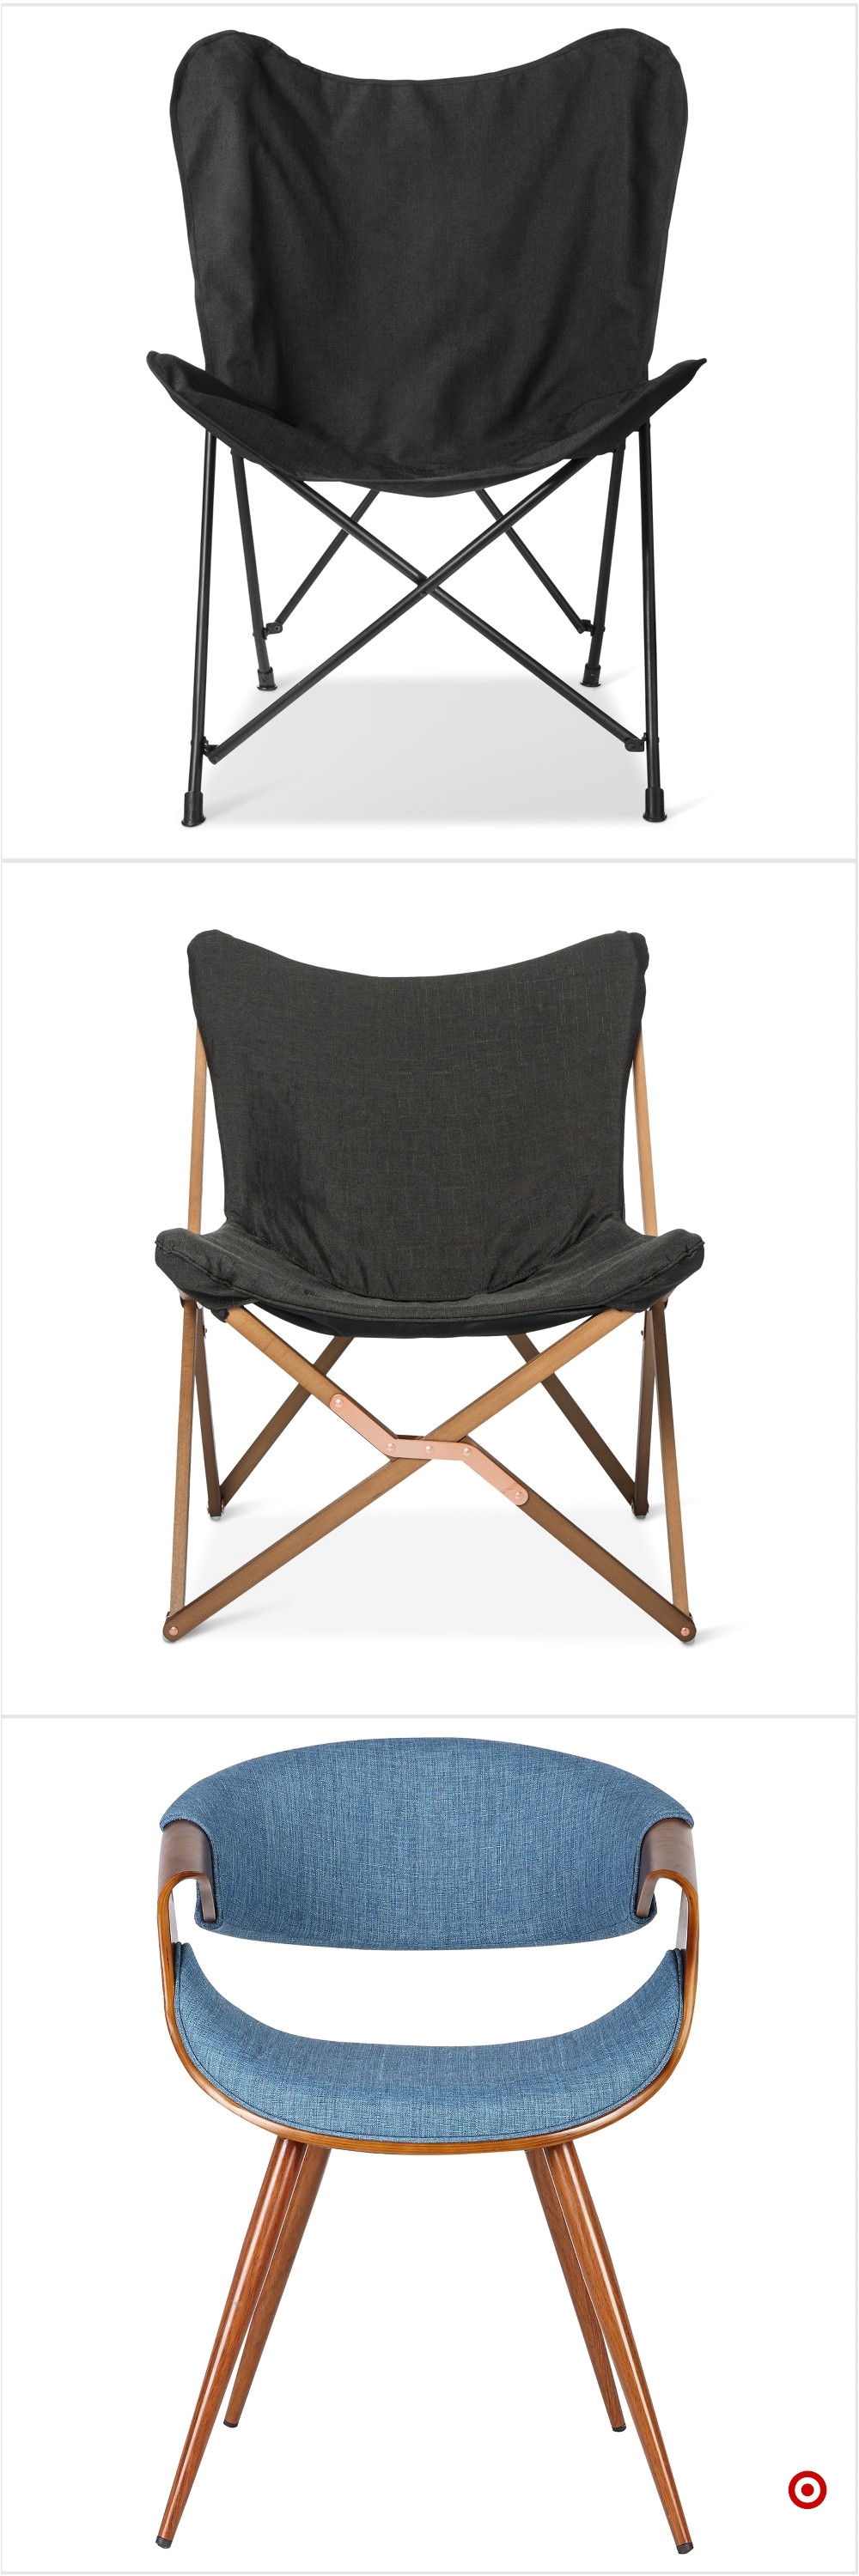 Black butterfly Chair Target Shop Target for butterfly Chairs You Will Love at Great Low Prices